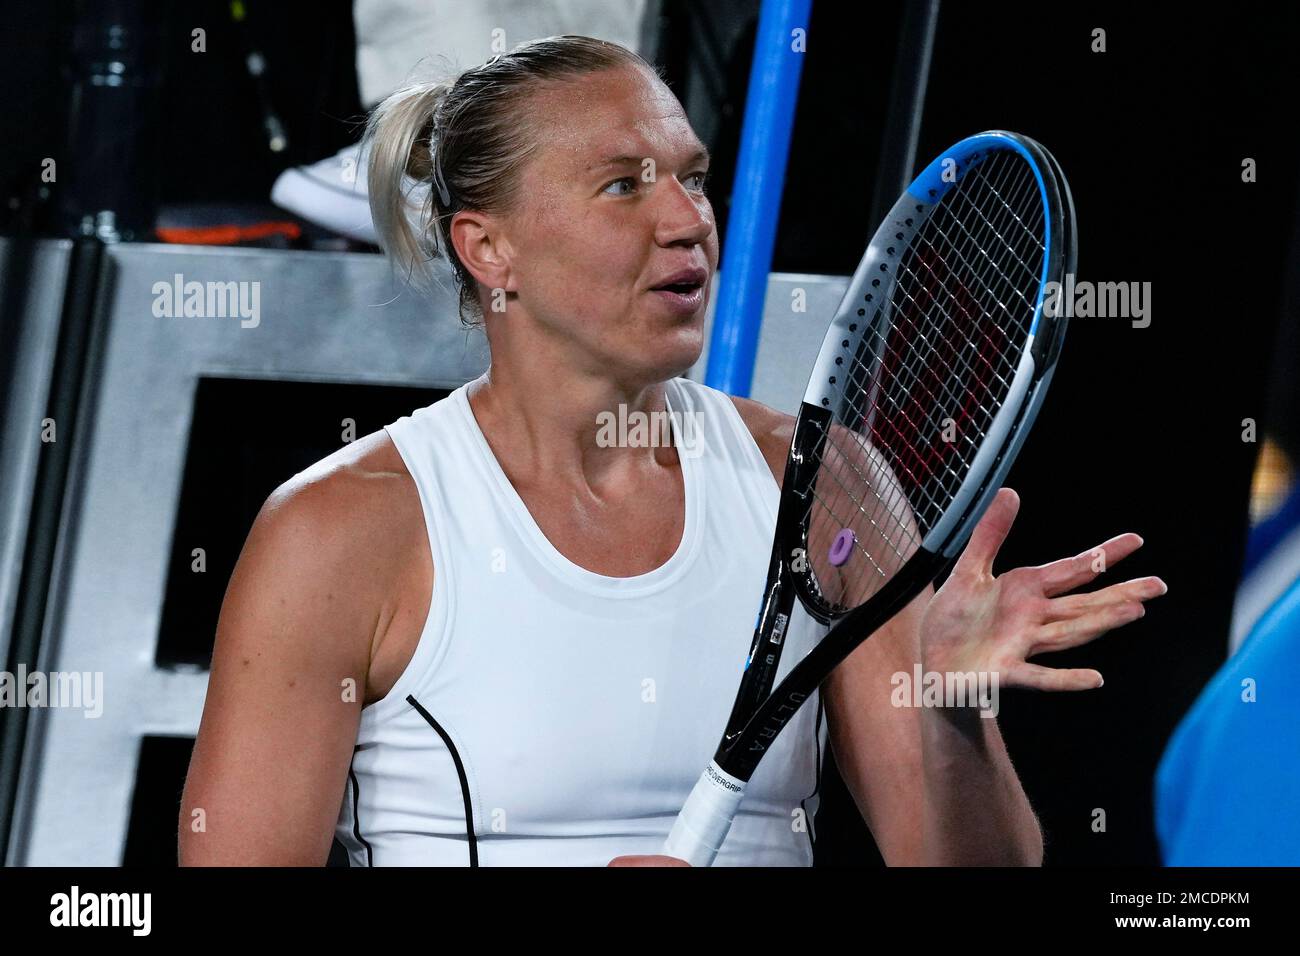 Kaia Kanepi of Estonia reacts after defeating Angelique Kerber of Germany in their first round match at the Australian Open tennis championships in Melbourne, Australia, Tuesday, Jan